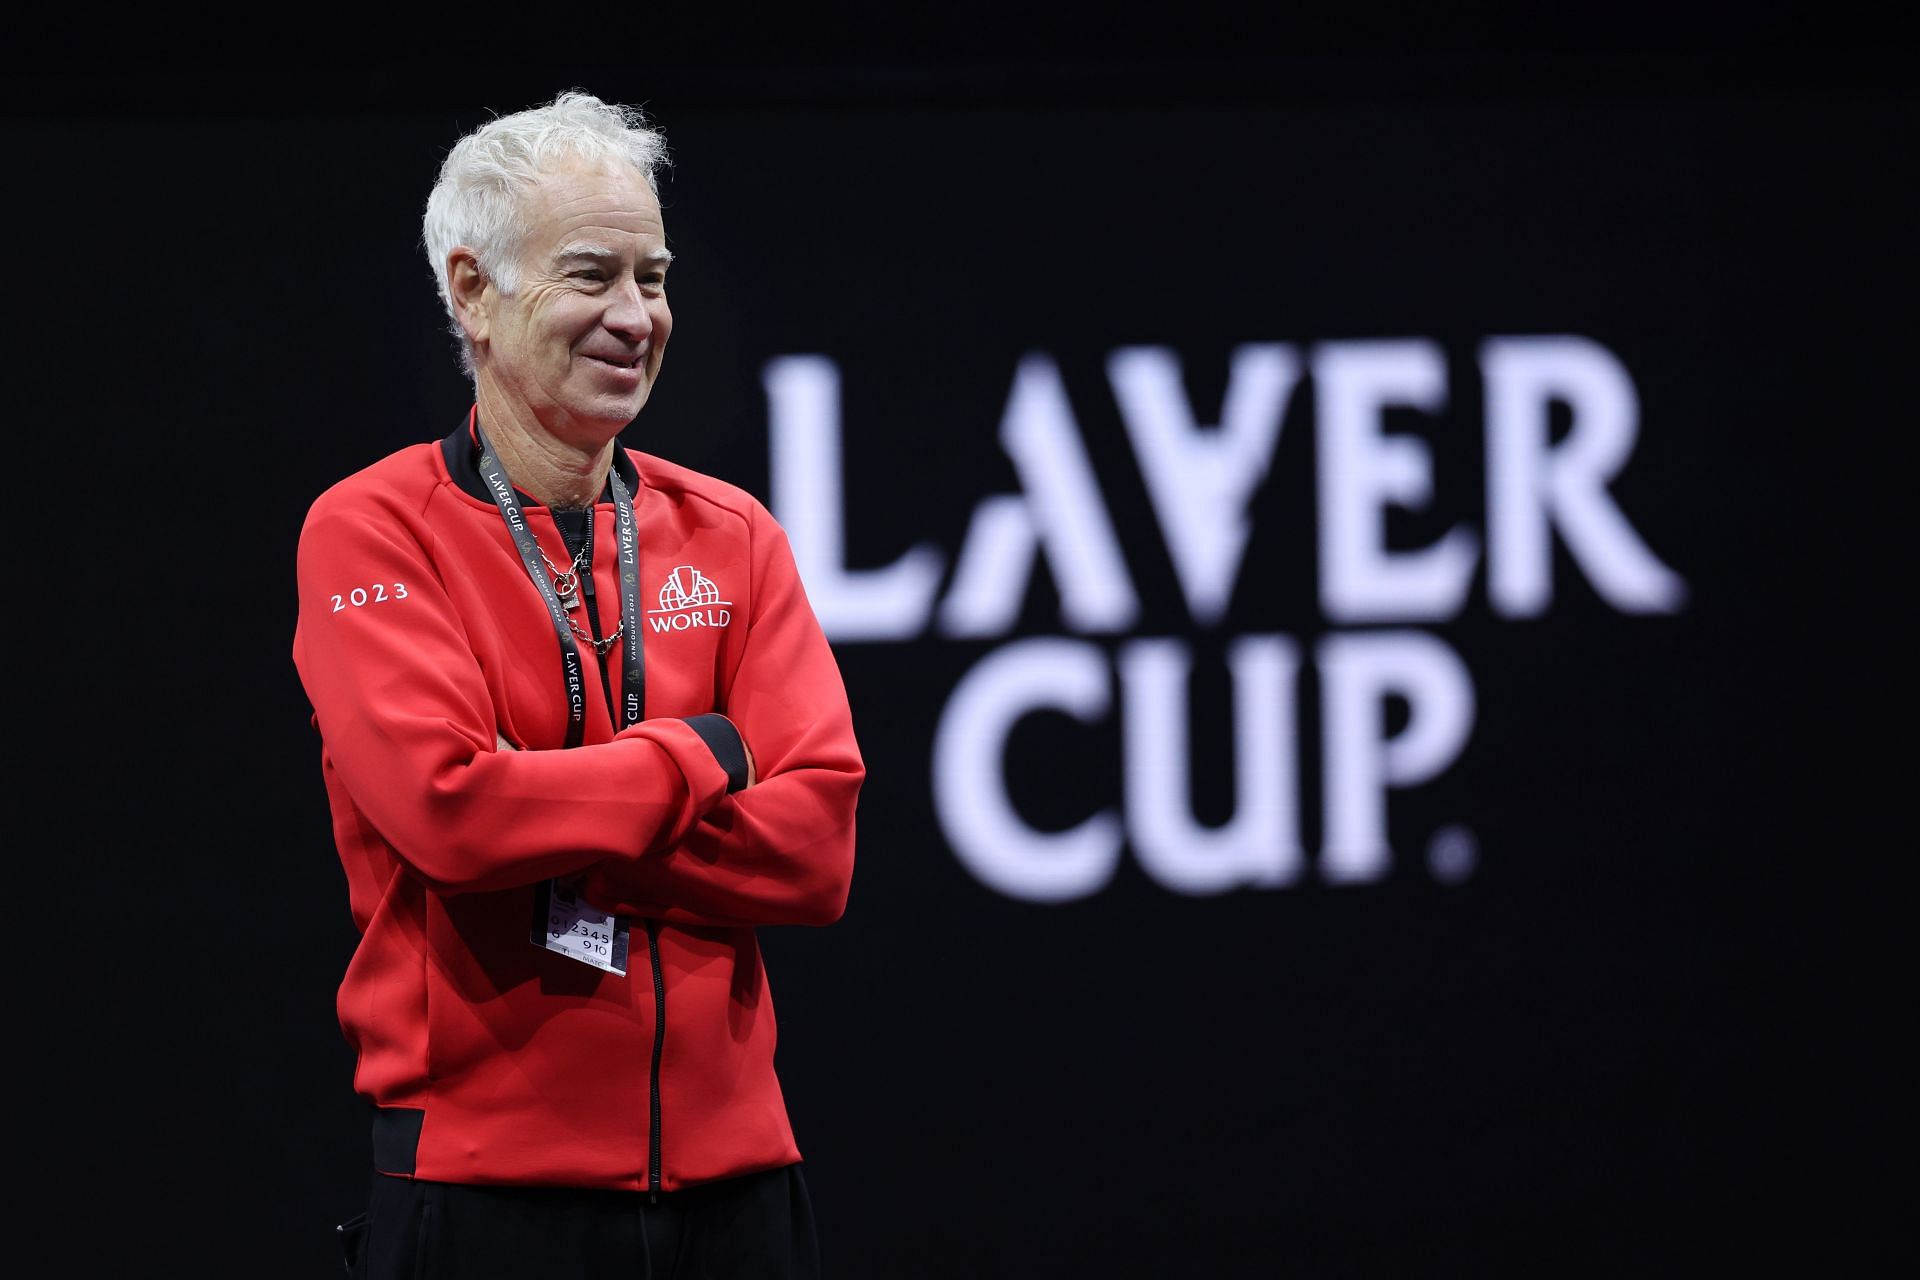 John McEnroe pictured at the 2023 Laver Cup